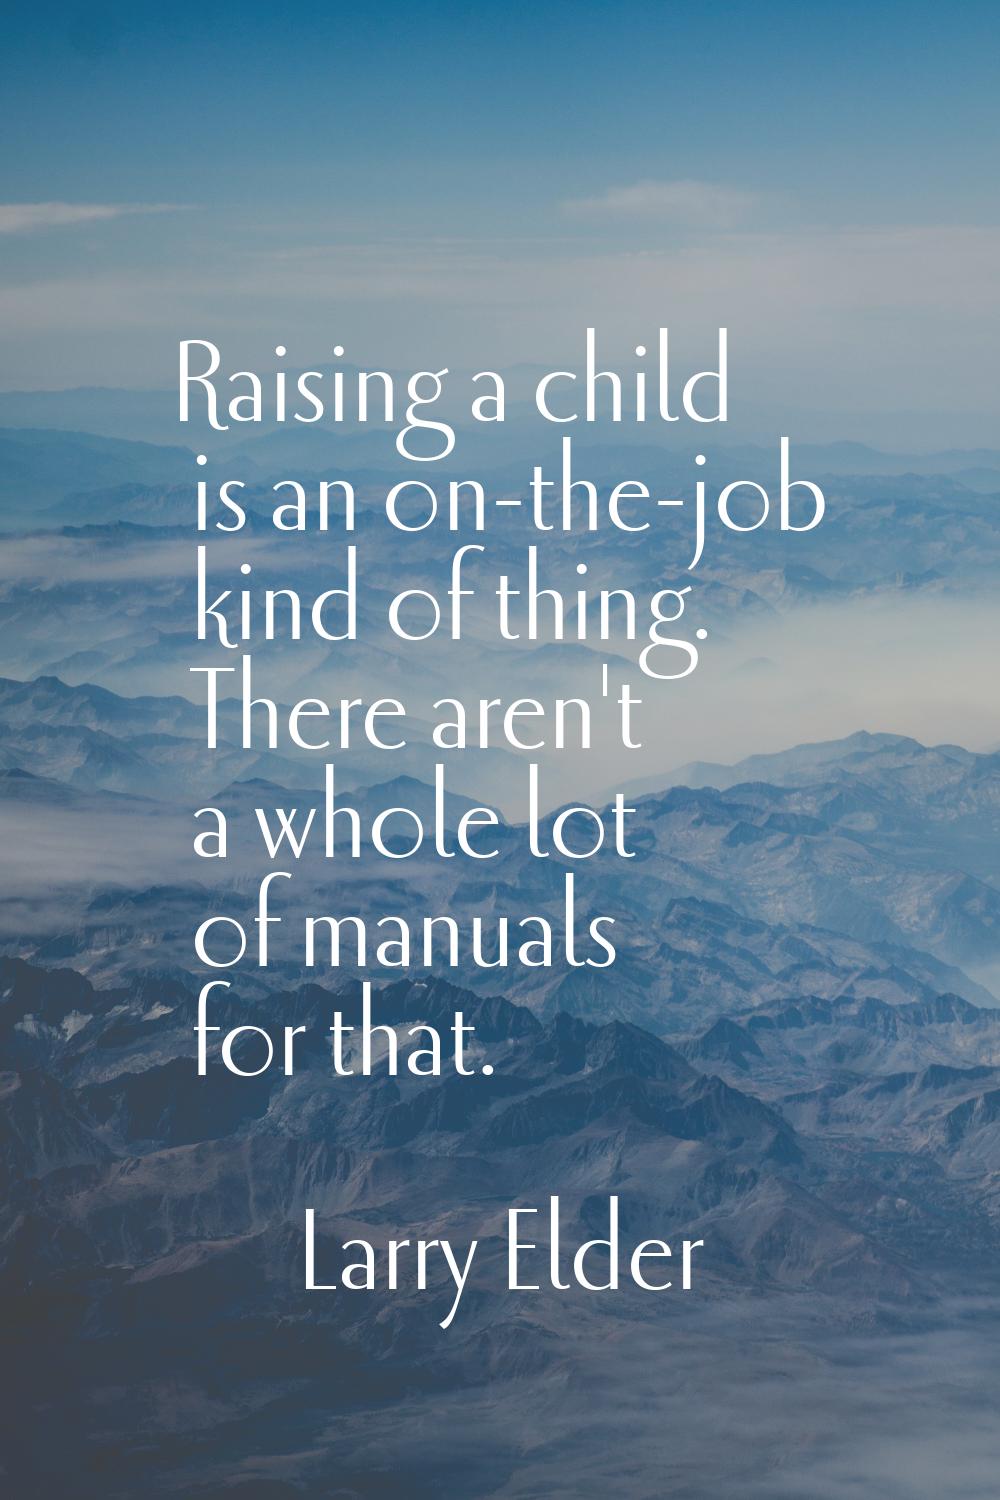 Raising a child is an on-the-job kind of thing. There aren't a whole lot of manuals for that.